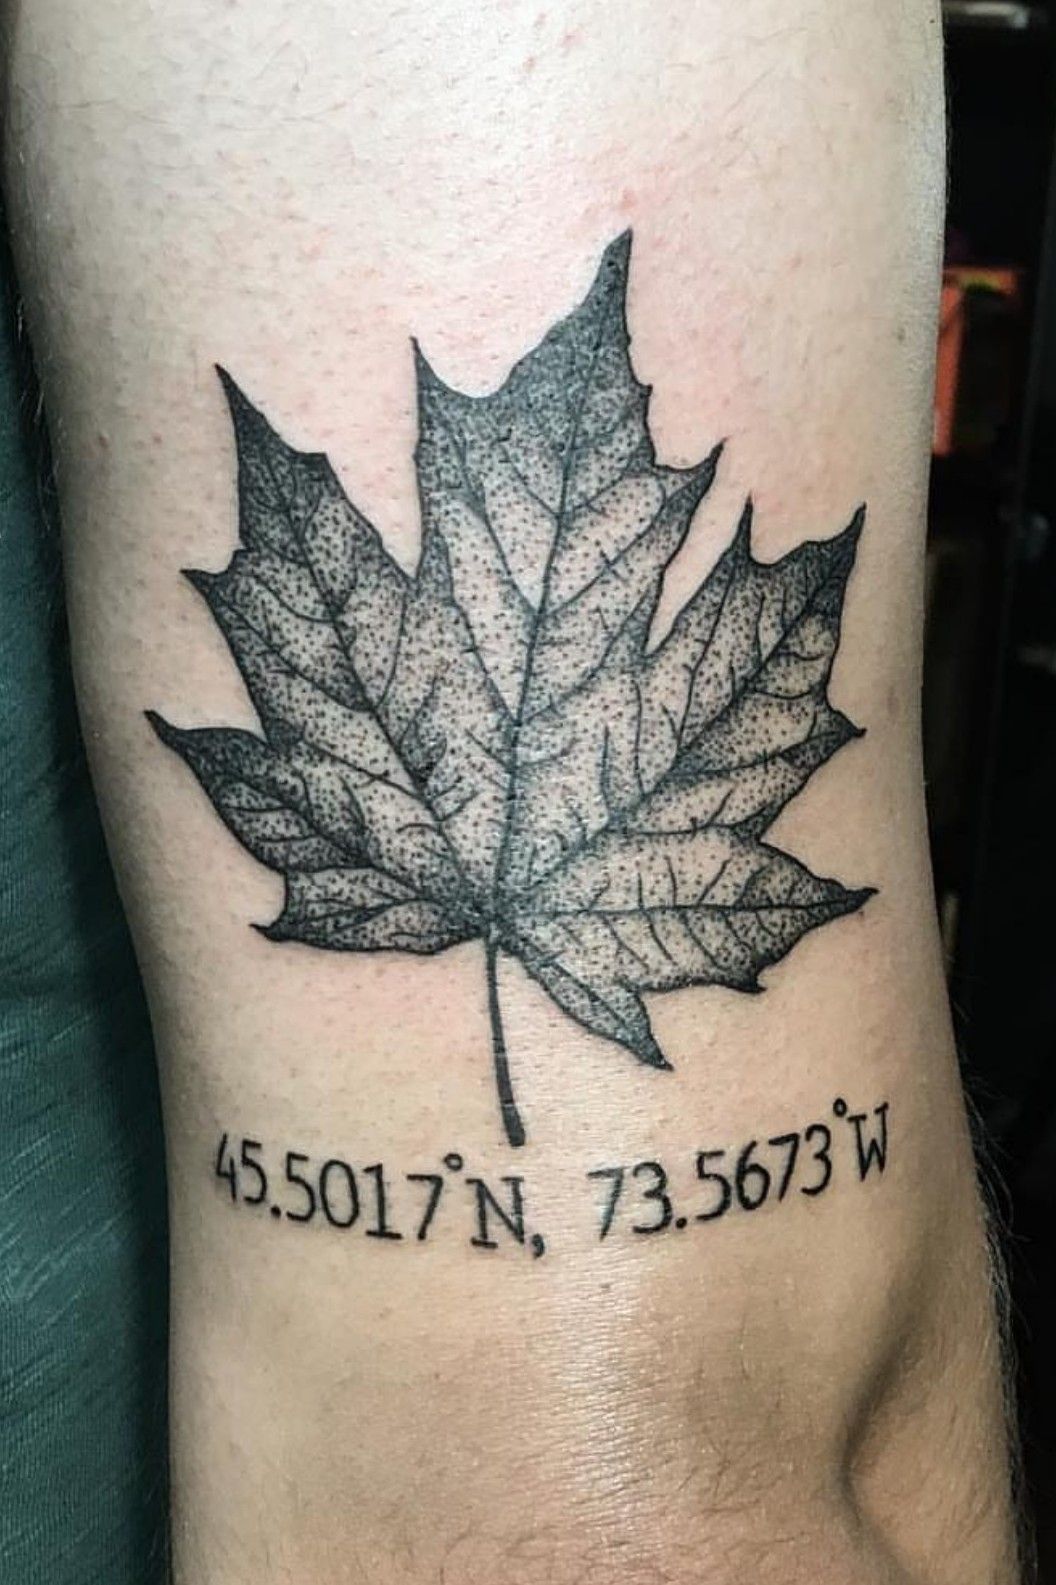 The Worlds Most Canadian Tattoos  Tattoo Ideas Artists and Models